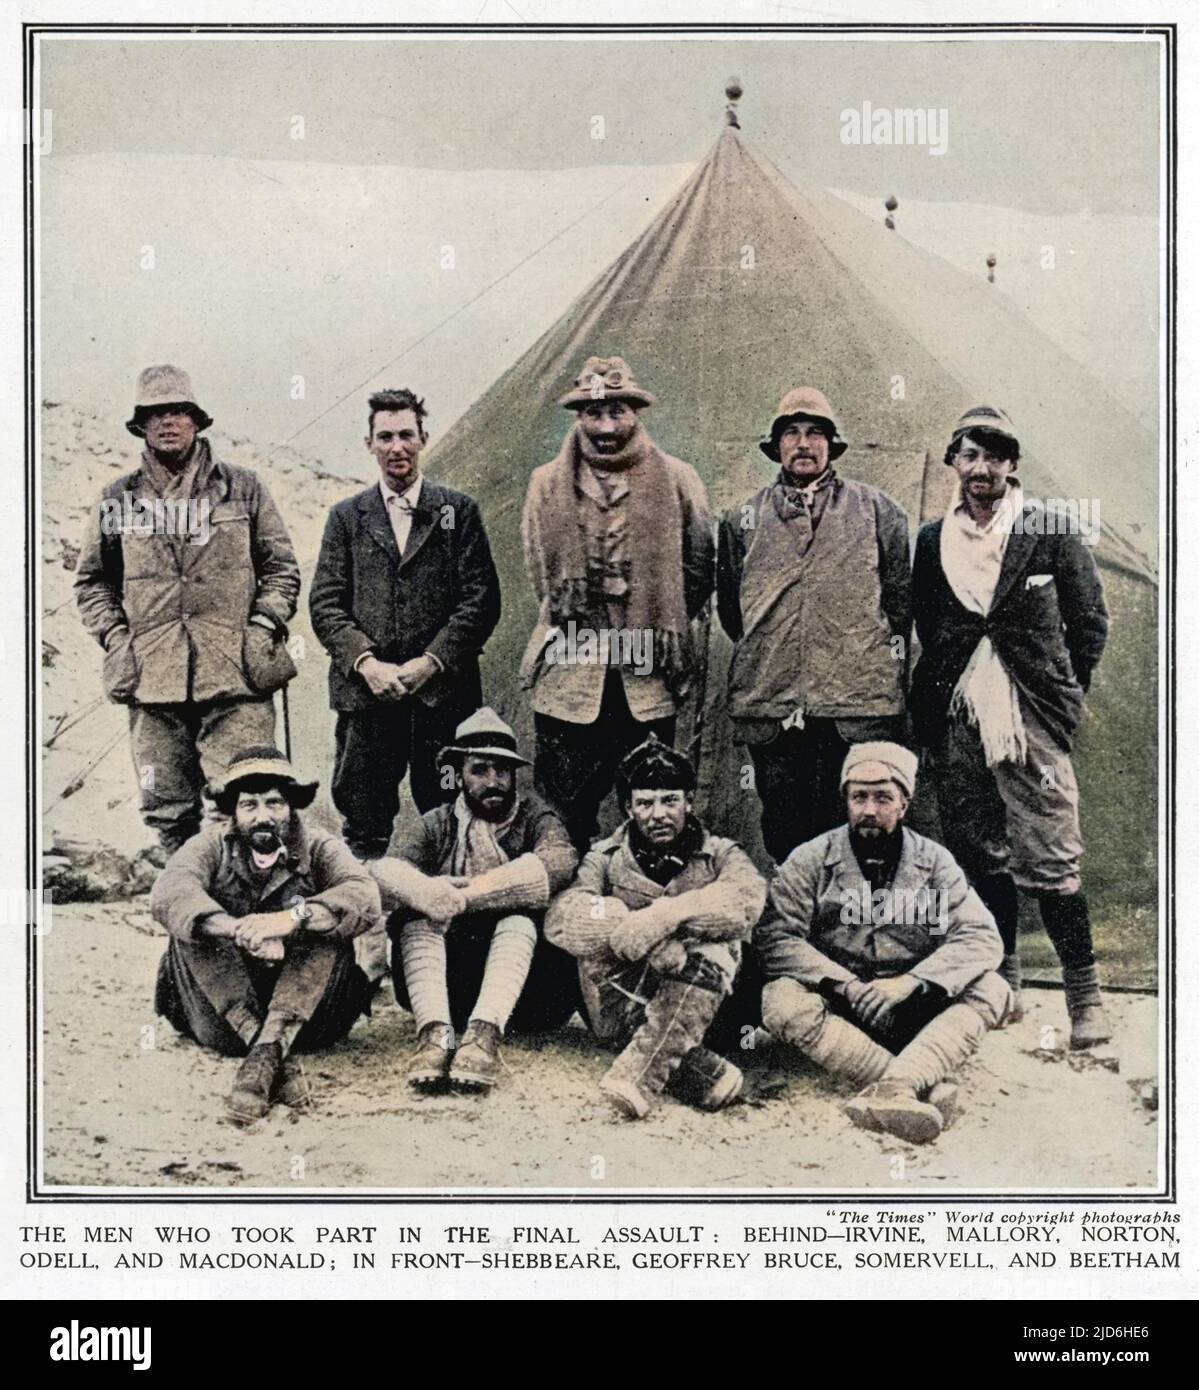 The 1924 Everest Expedition team in their camp. Those pictured are back row, left to right: Irvine, Mallory, Norton, Odell and MacDonald. Front row, left to right: Shebbeare, Geoffrey Bruce, Somervell and Beetham. Colourised version of: 10217924       Date: 1924 Stock Photo